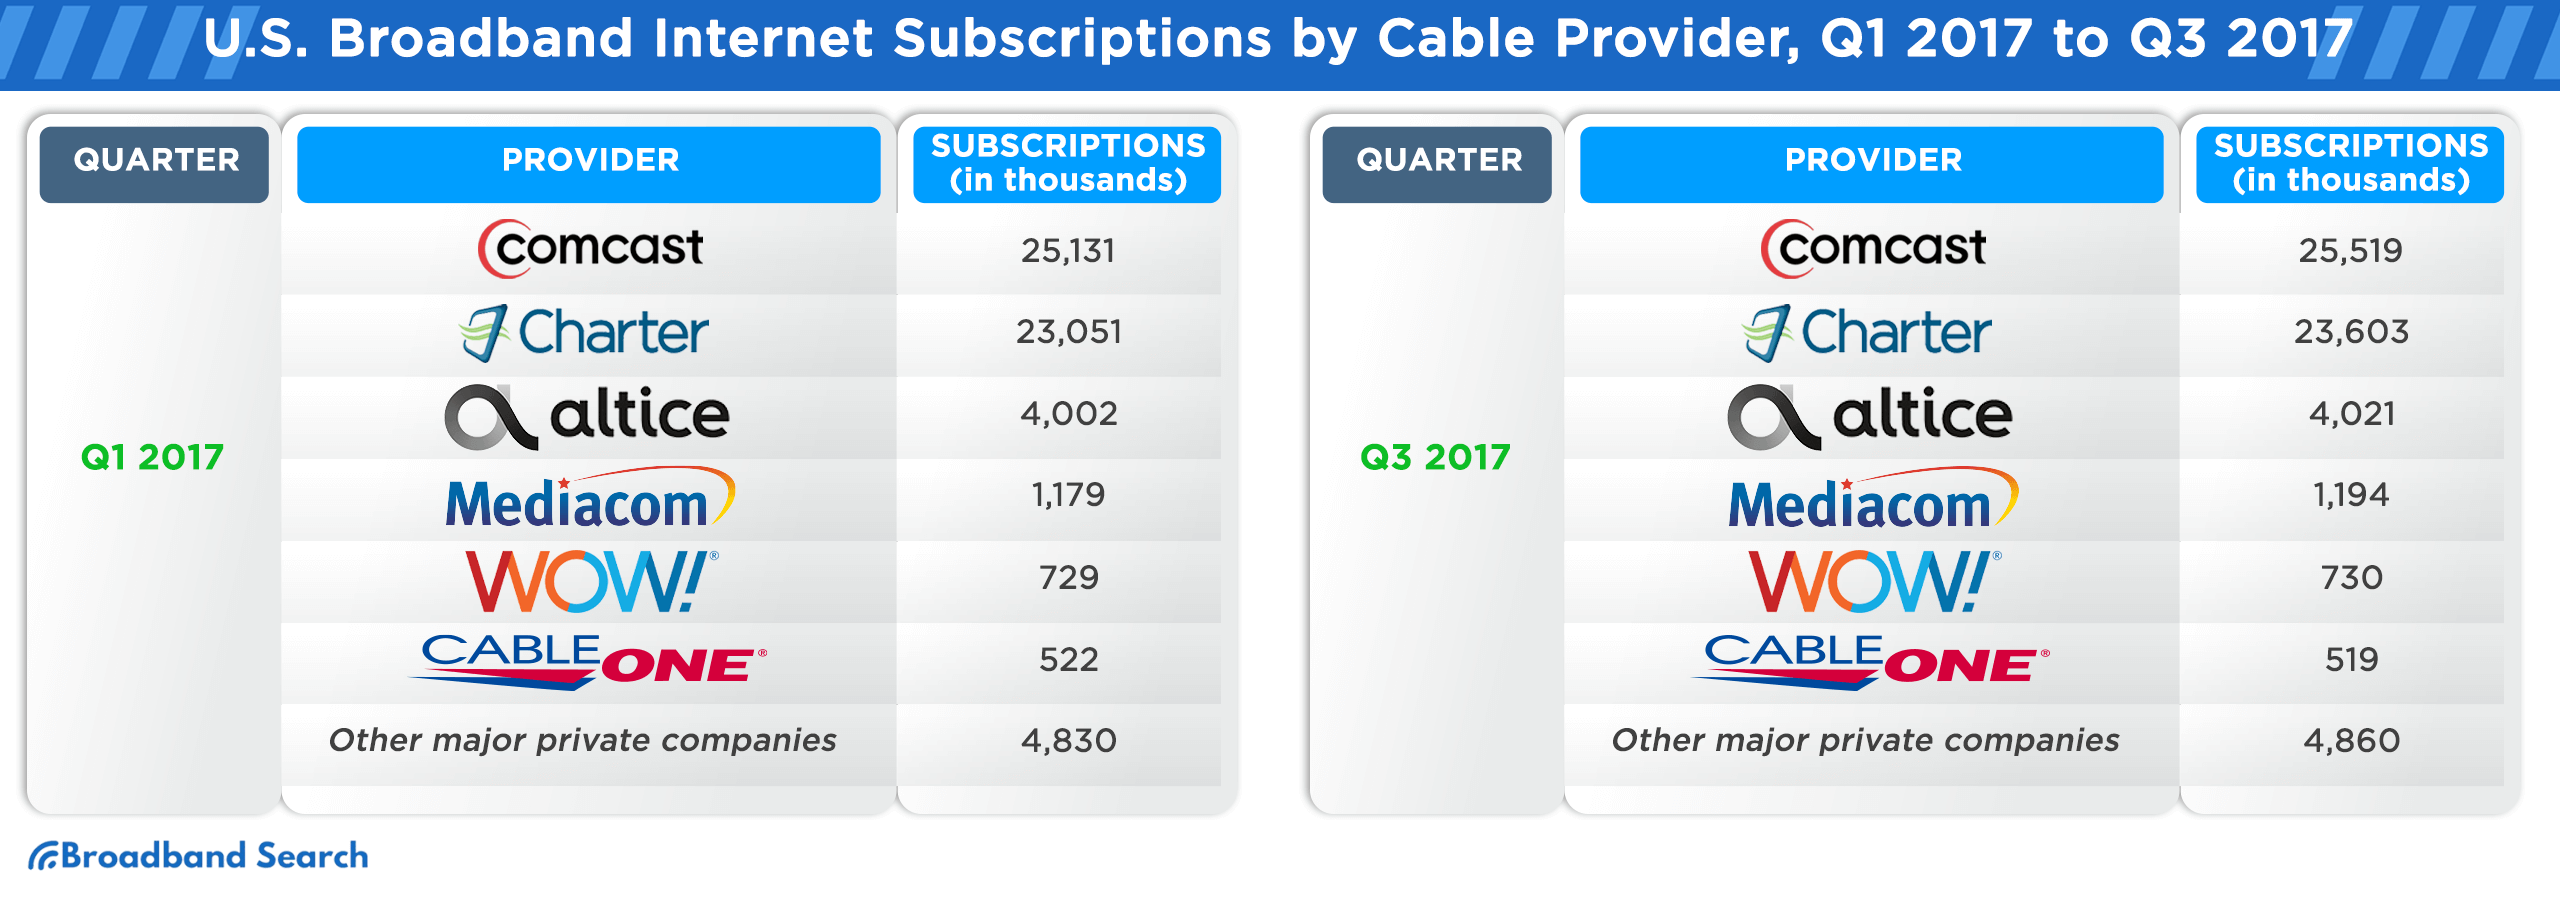 U.S. Broadband Internet Subscriptions by cable provider for quarters one to three of 2017